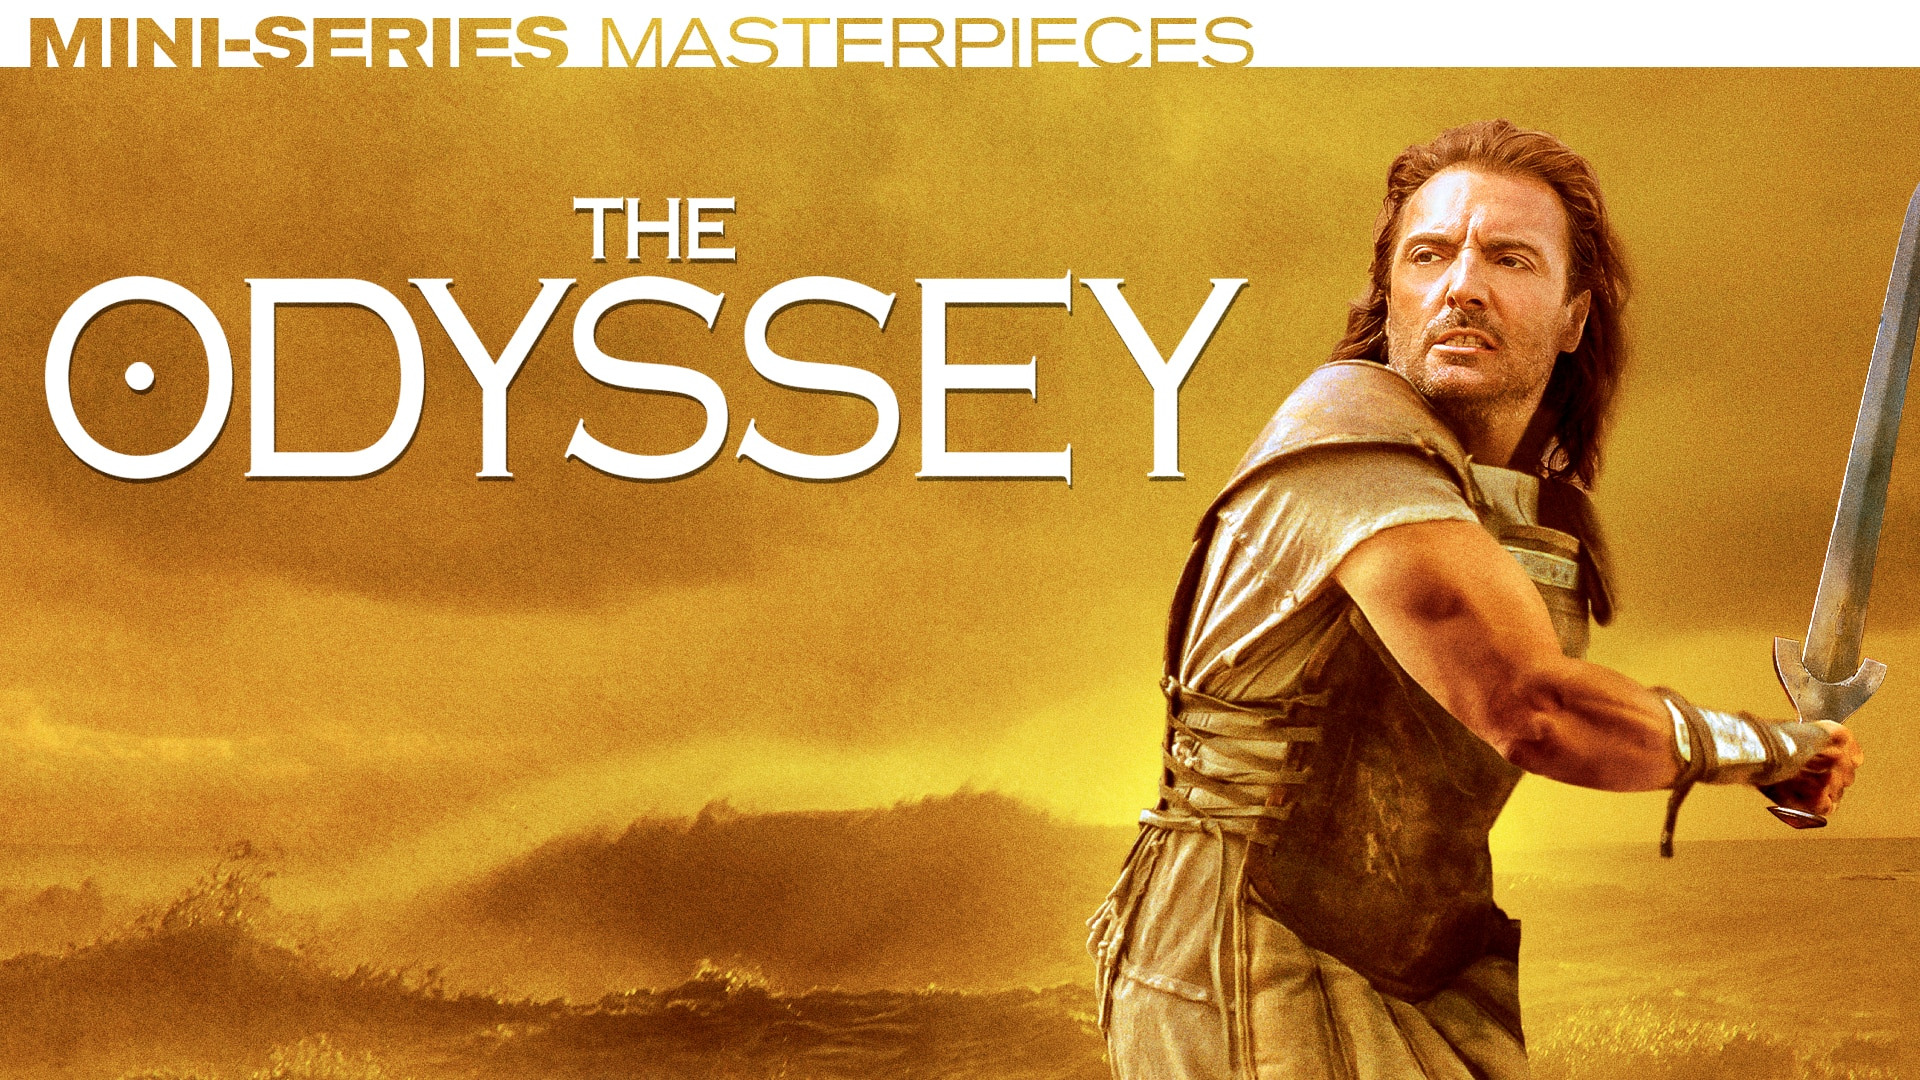 Show The Odyssey (1997)